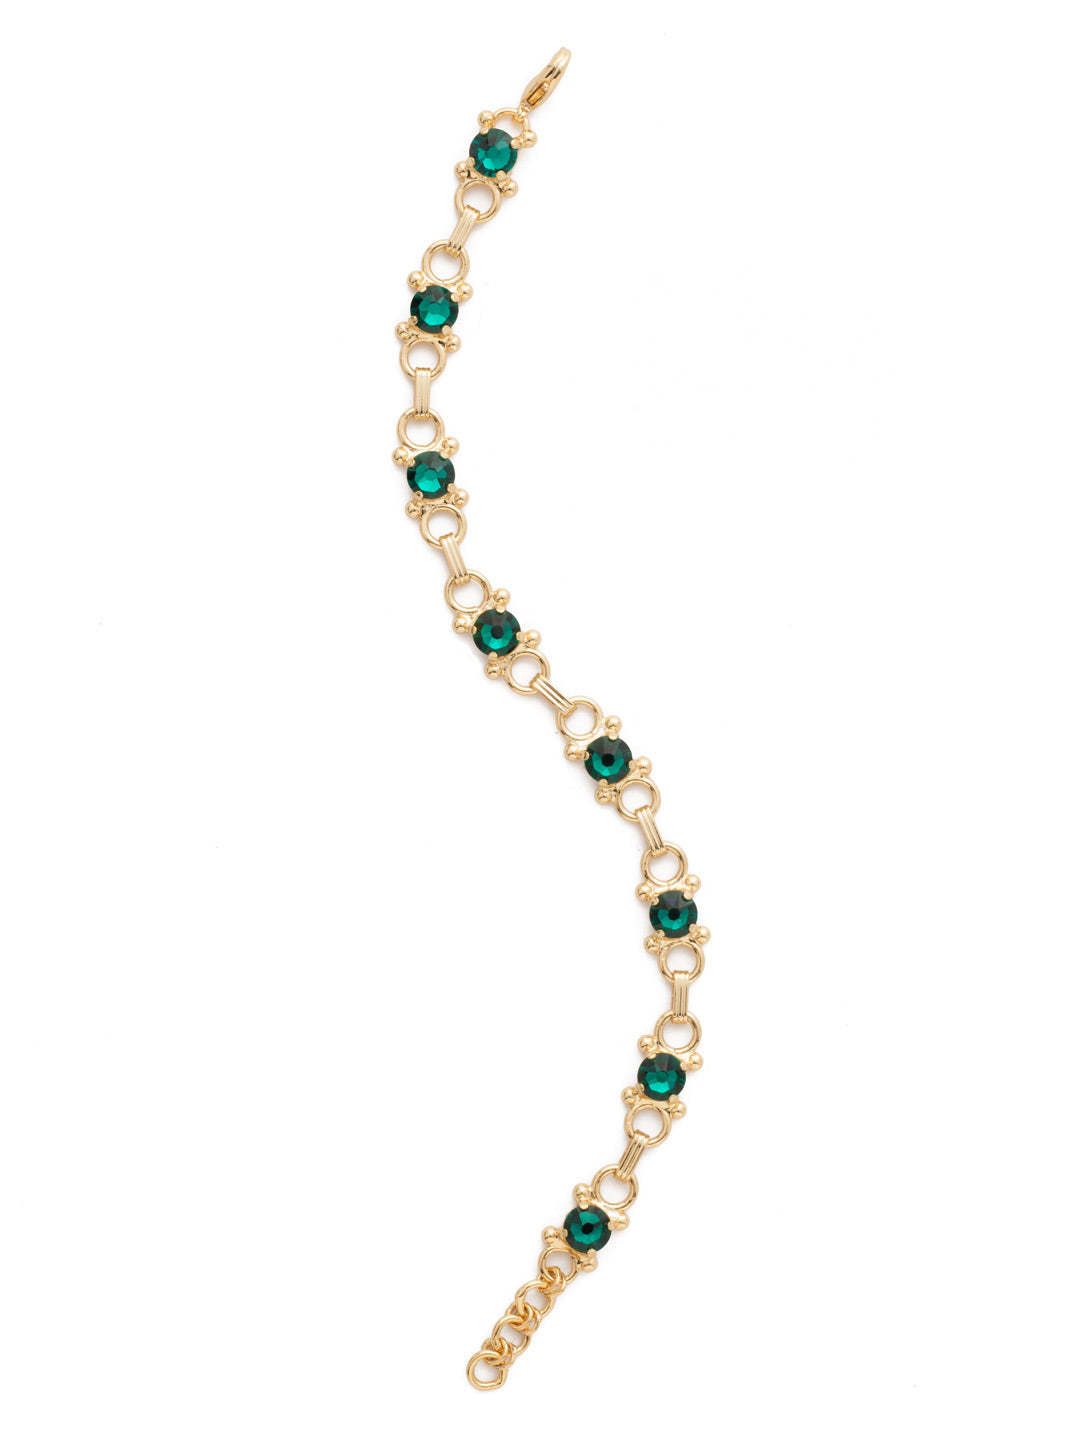 Mini Eyelet Line Bracelet - BDH5BGEME - <p>Our mini Eyelet Line Bracelet offers a classic design with edgy elements. Add this line bracelet to any look for just enough sparkle. From Sorrelli's Emerald collection in our Bright Gold-tone finish.</p>